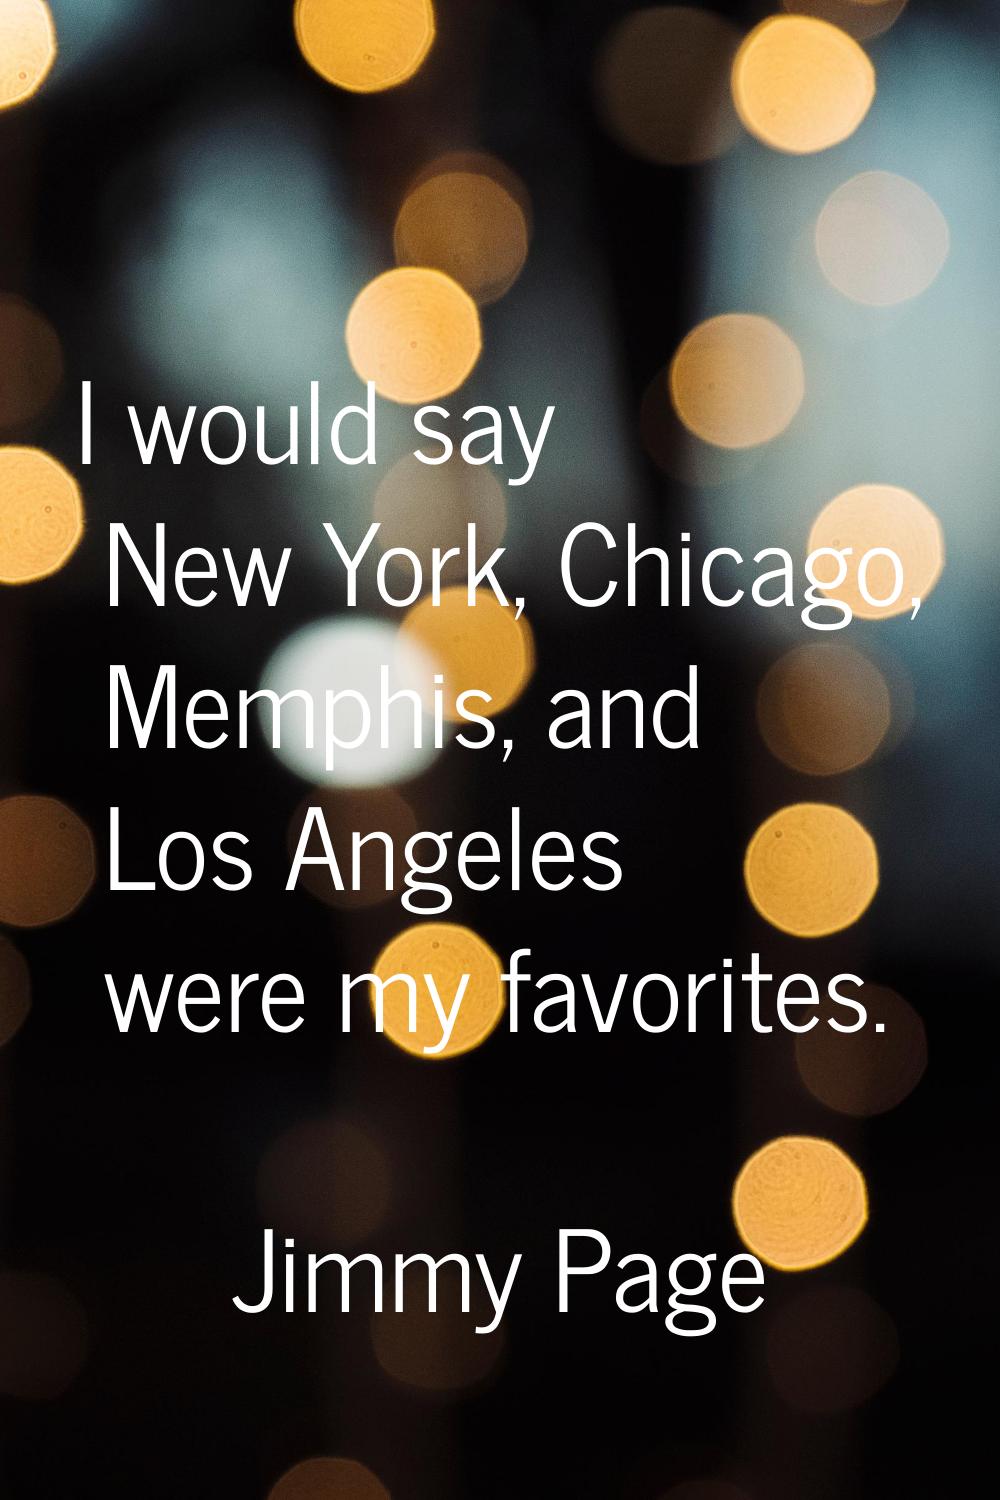 I would say New York, Chicago, Memphis, and Los Angeles were my favorites.